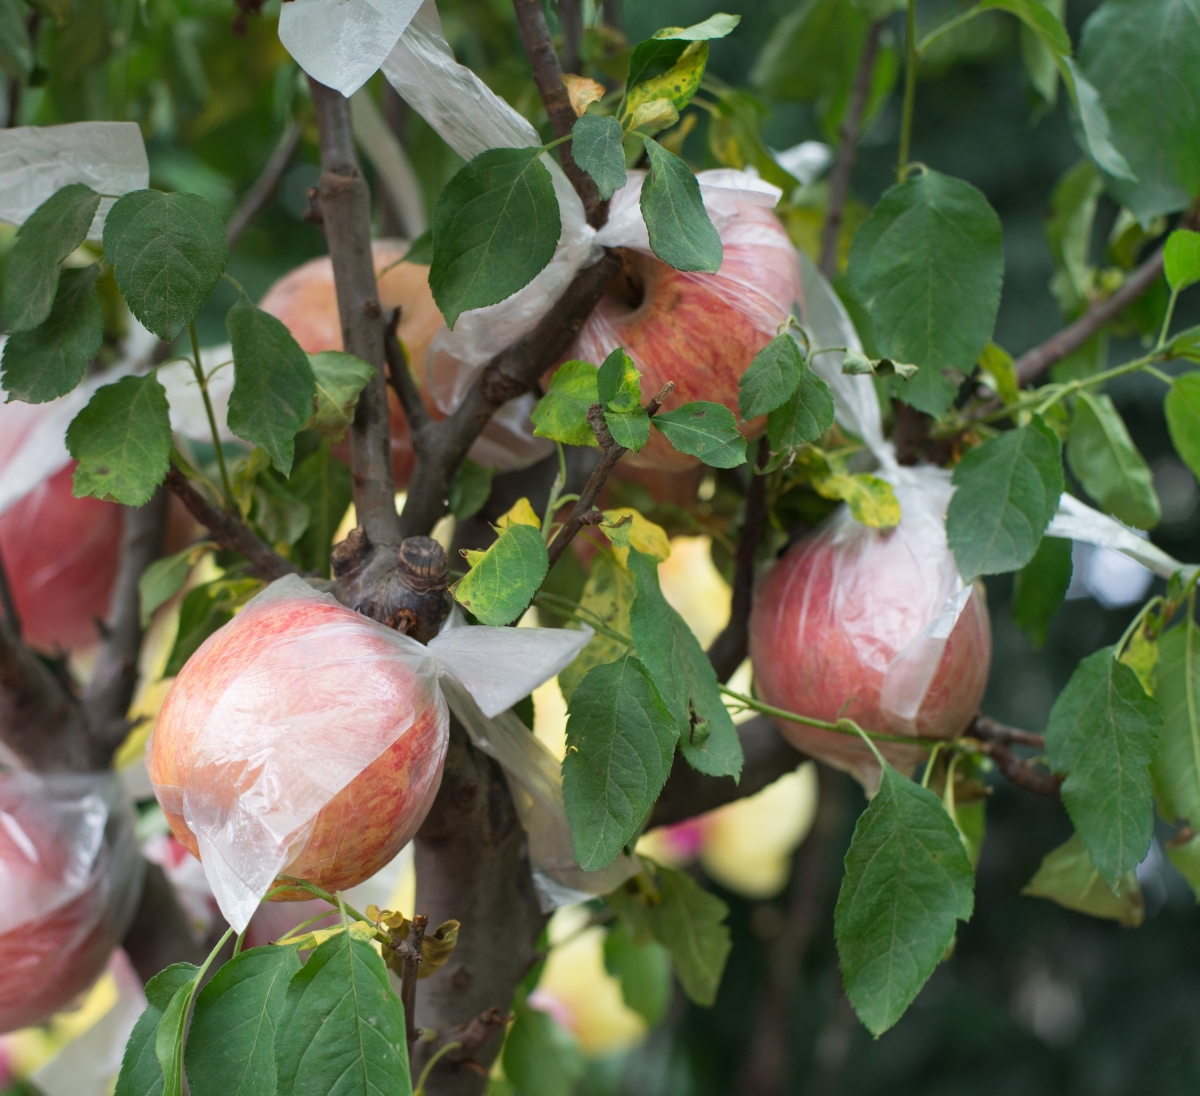 Apples on tree wrapped in plastic bags.